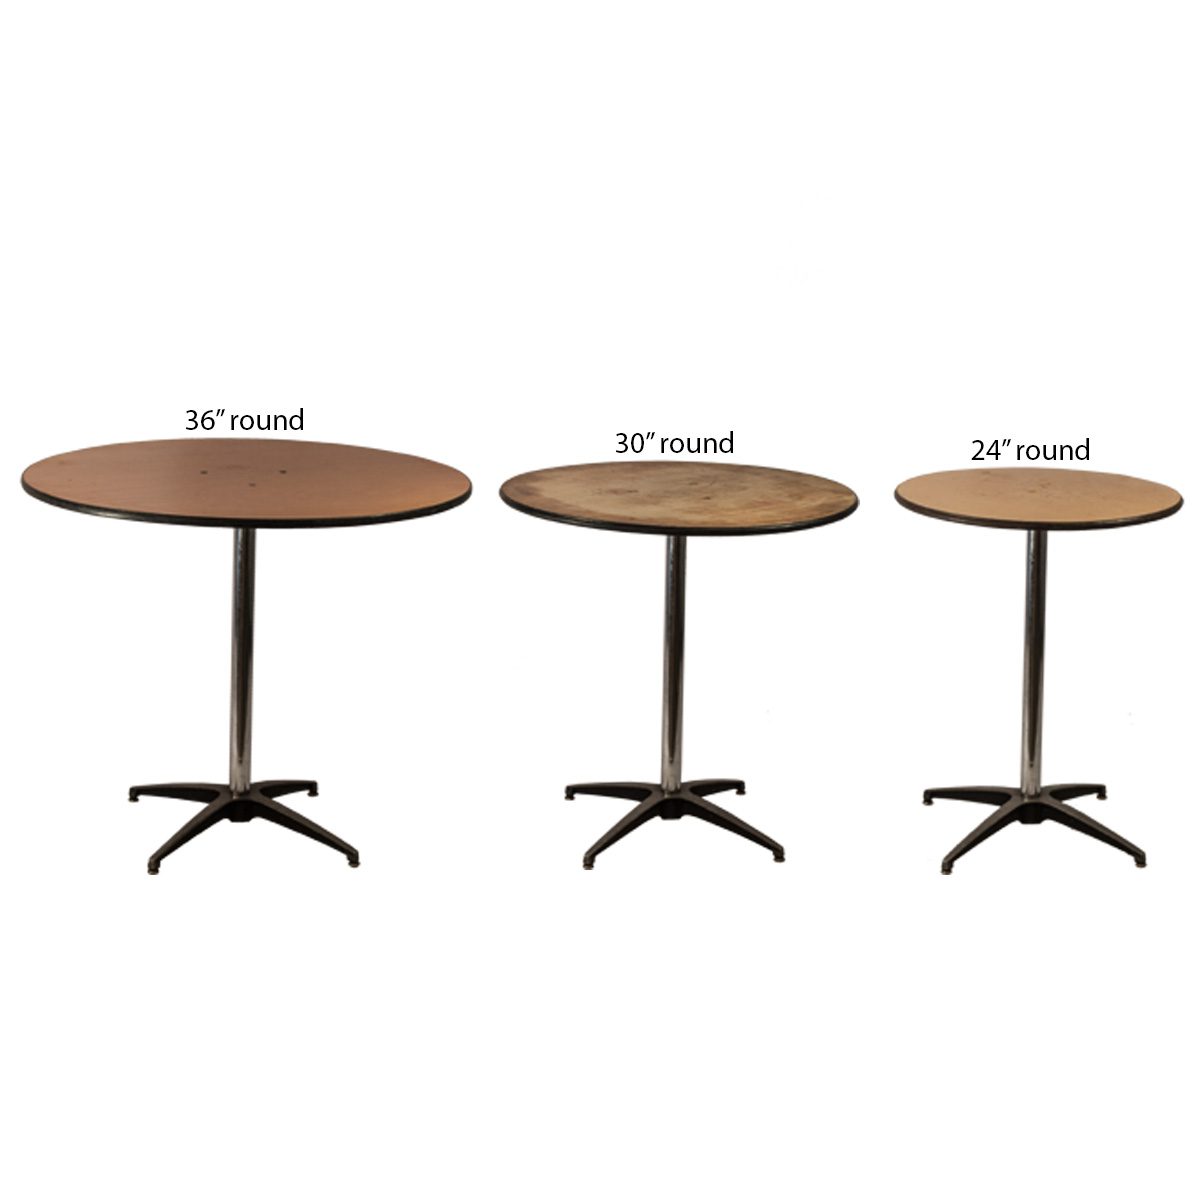 Round Table 36 30 24, 36 Inch Round Wood Folding Table